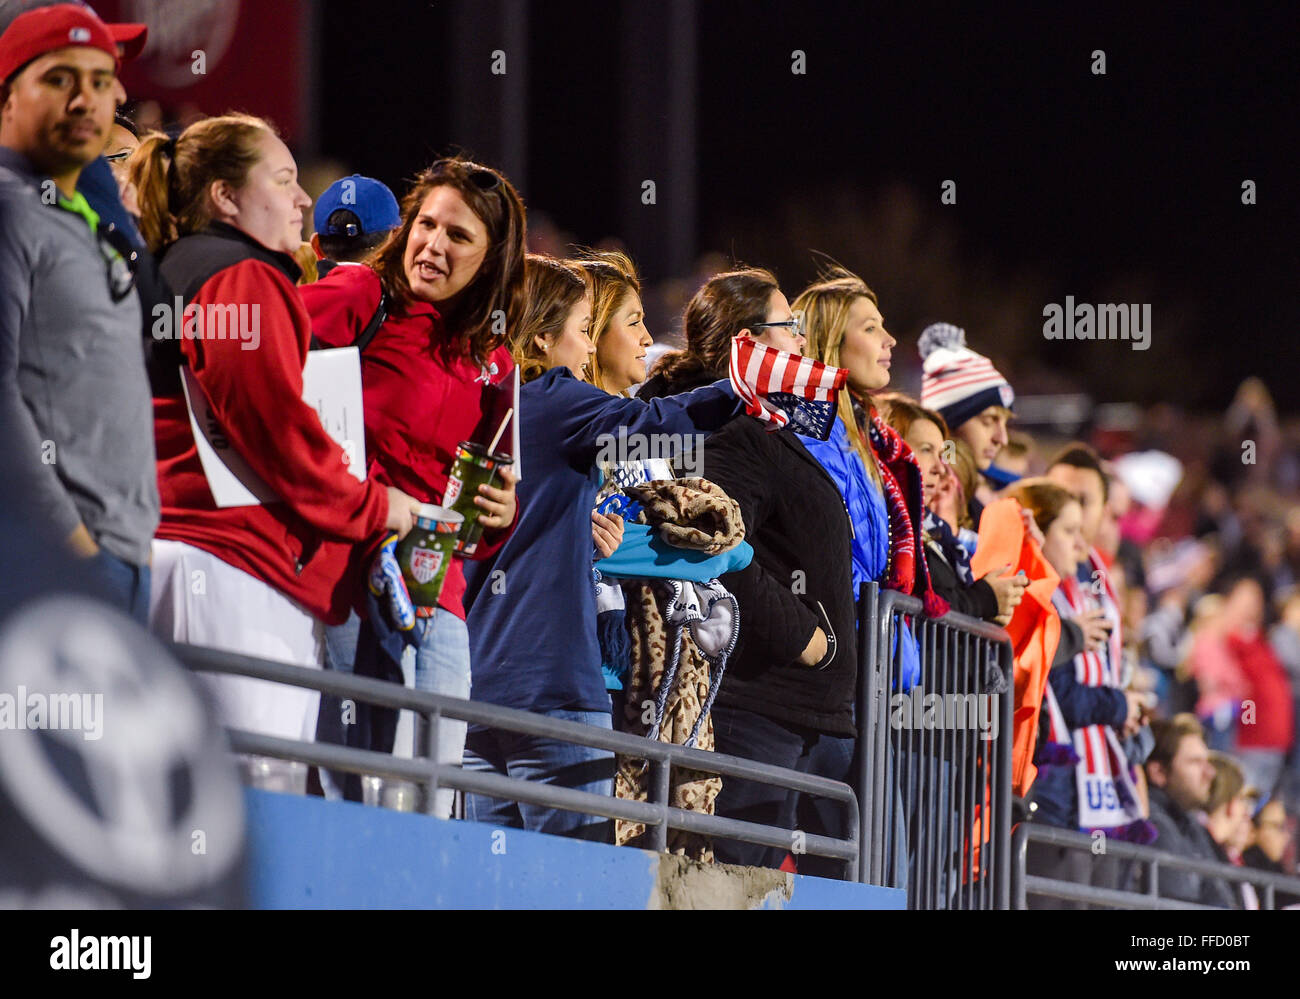 USA fans cheer during the 2016 CONCACAF Women's Olympic Qualifiers between Costa Rica and USA Soccer team, Wednesday Feb. 10th, 2016 at Toyota Stadium in Frisco, Texas.USA wins 5-0.(Manny Flores/Cal Sport Media) © Cal Sport Media/Alamy Live News Stock Photo